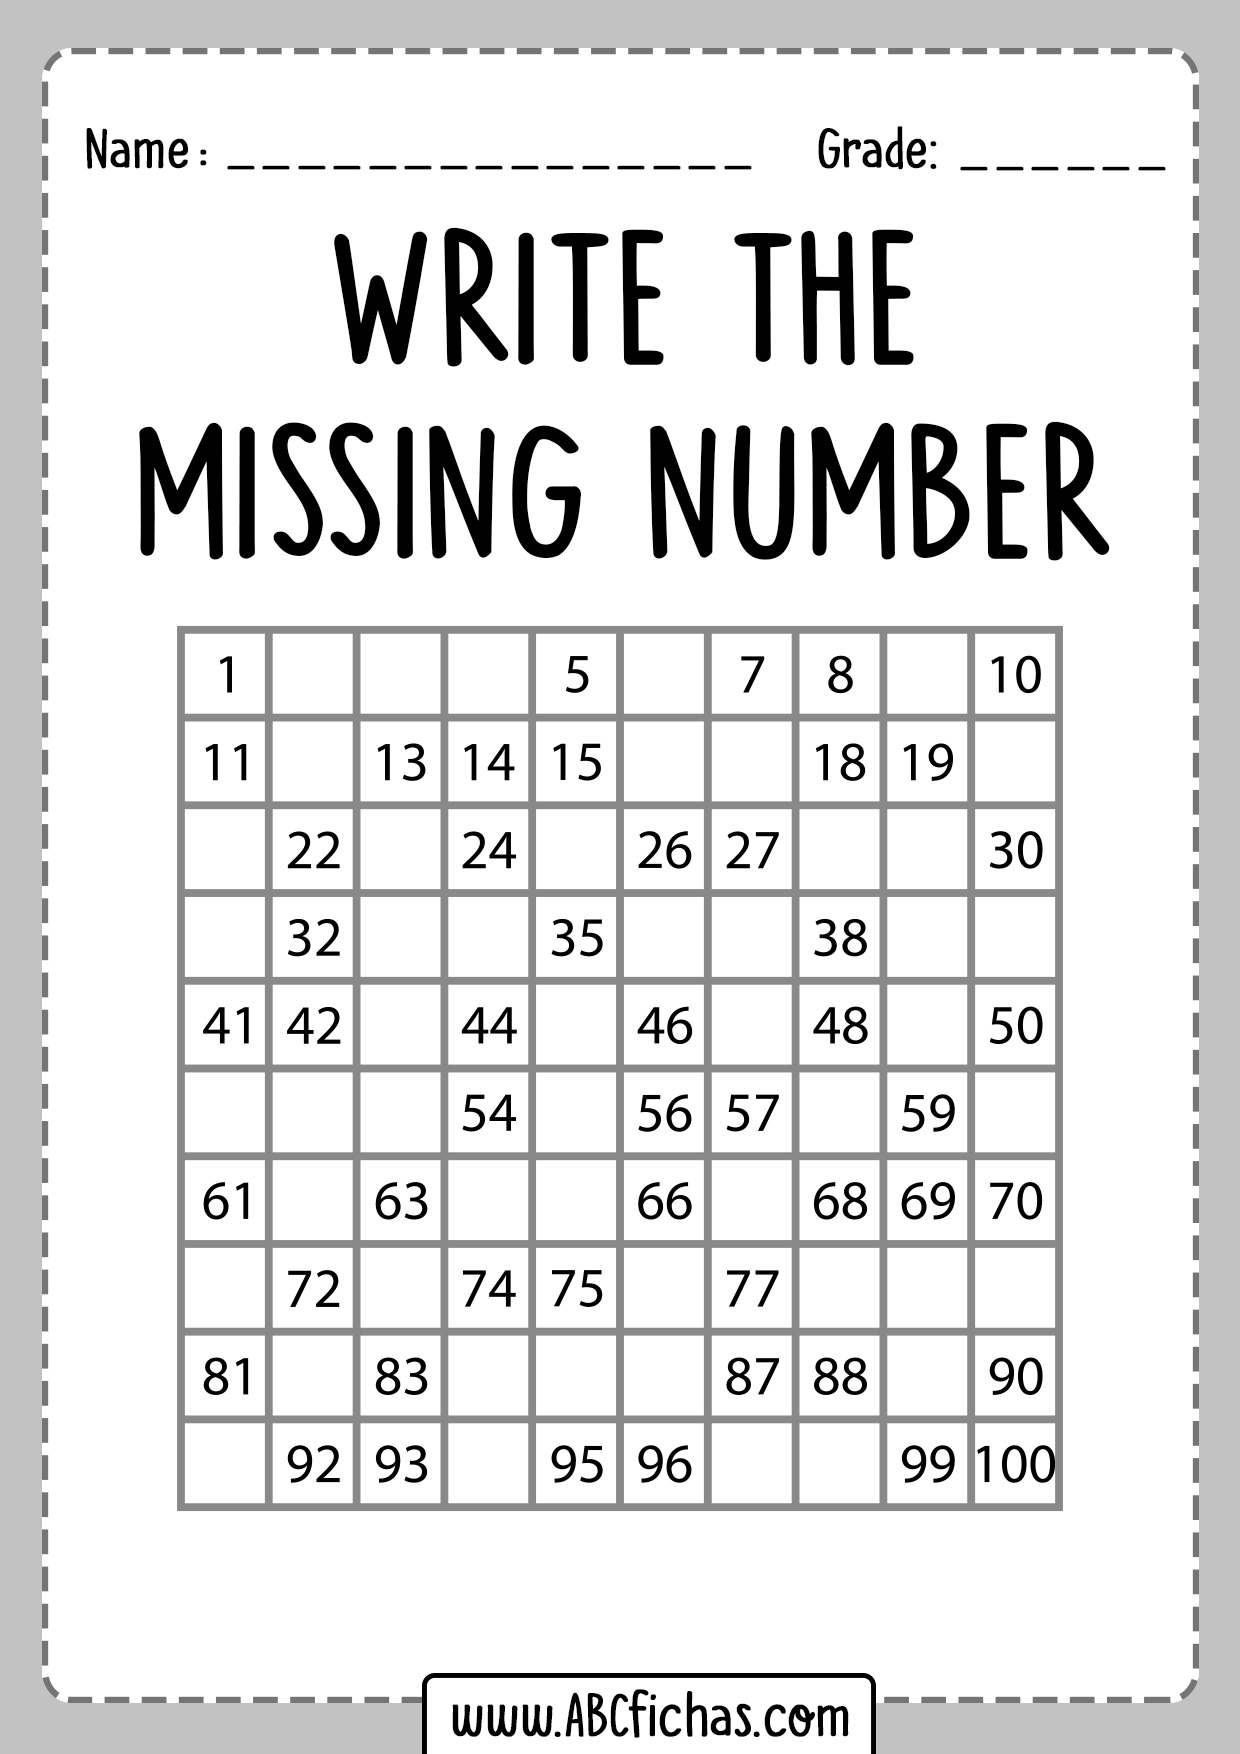 Write the missing number 1-100